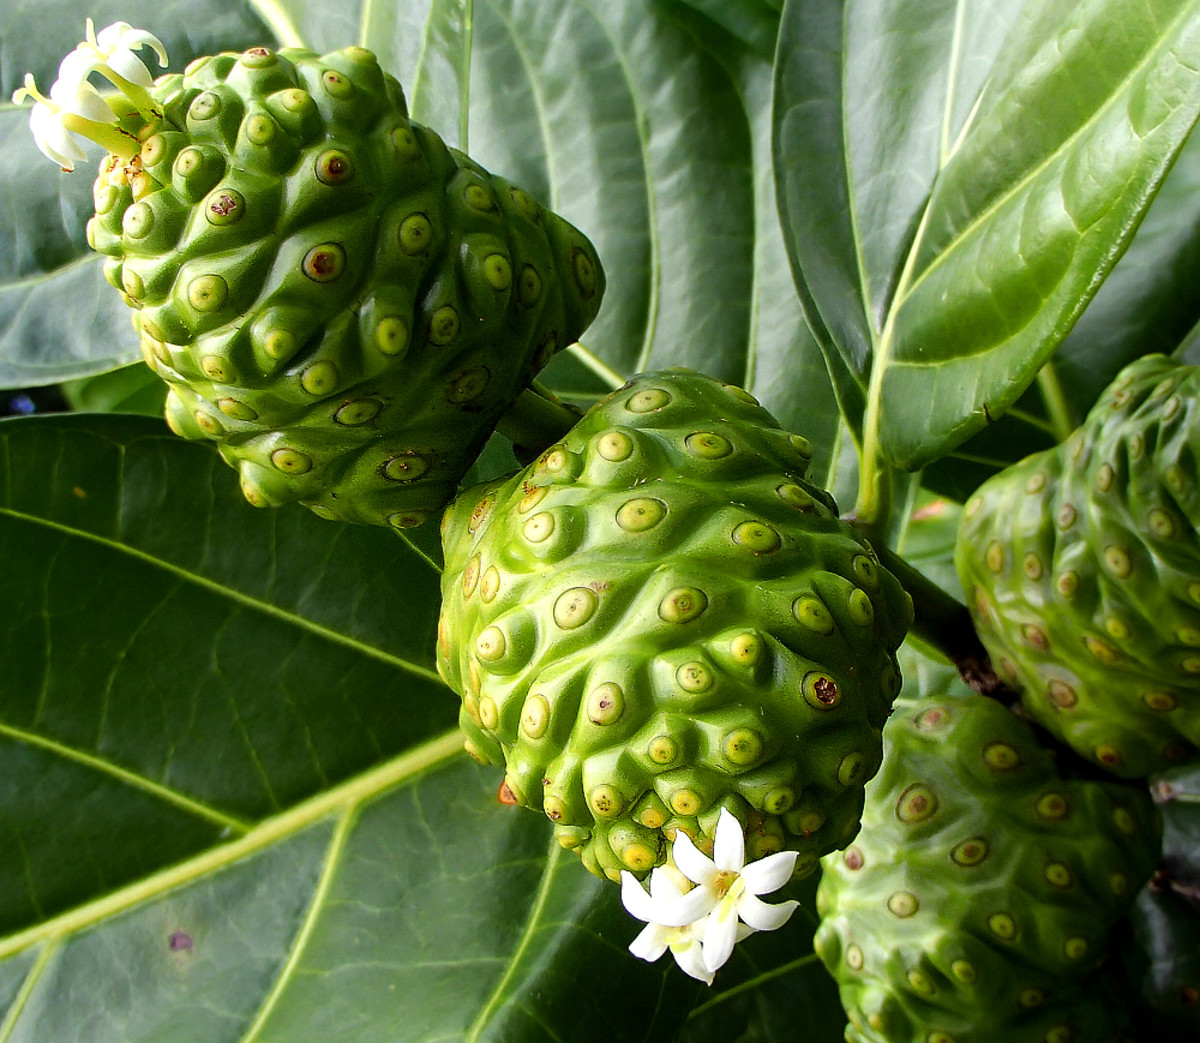 The infamous Noni fruit that smells and tastes (if you dare!) like vomit.